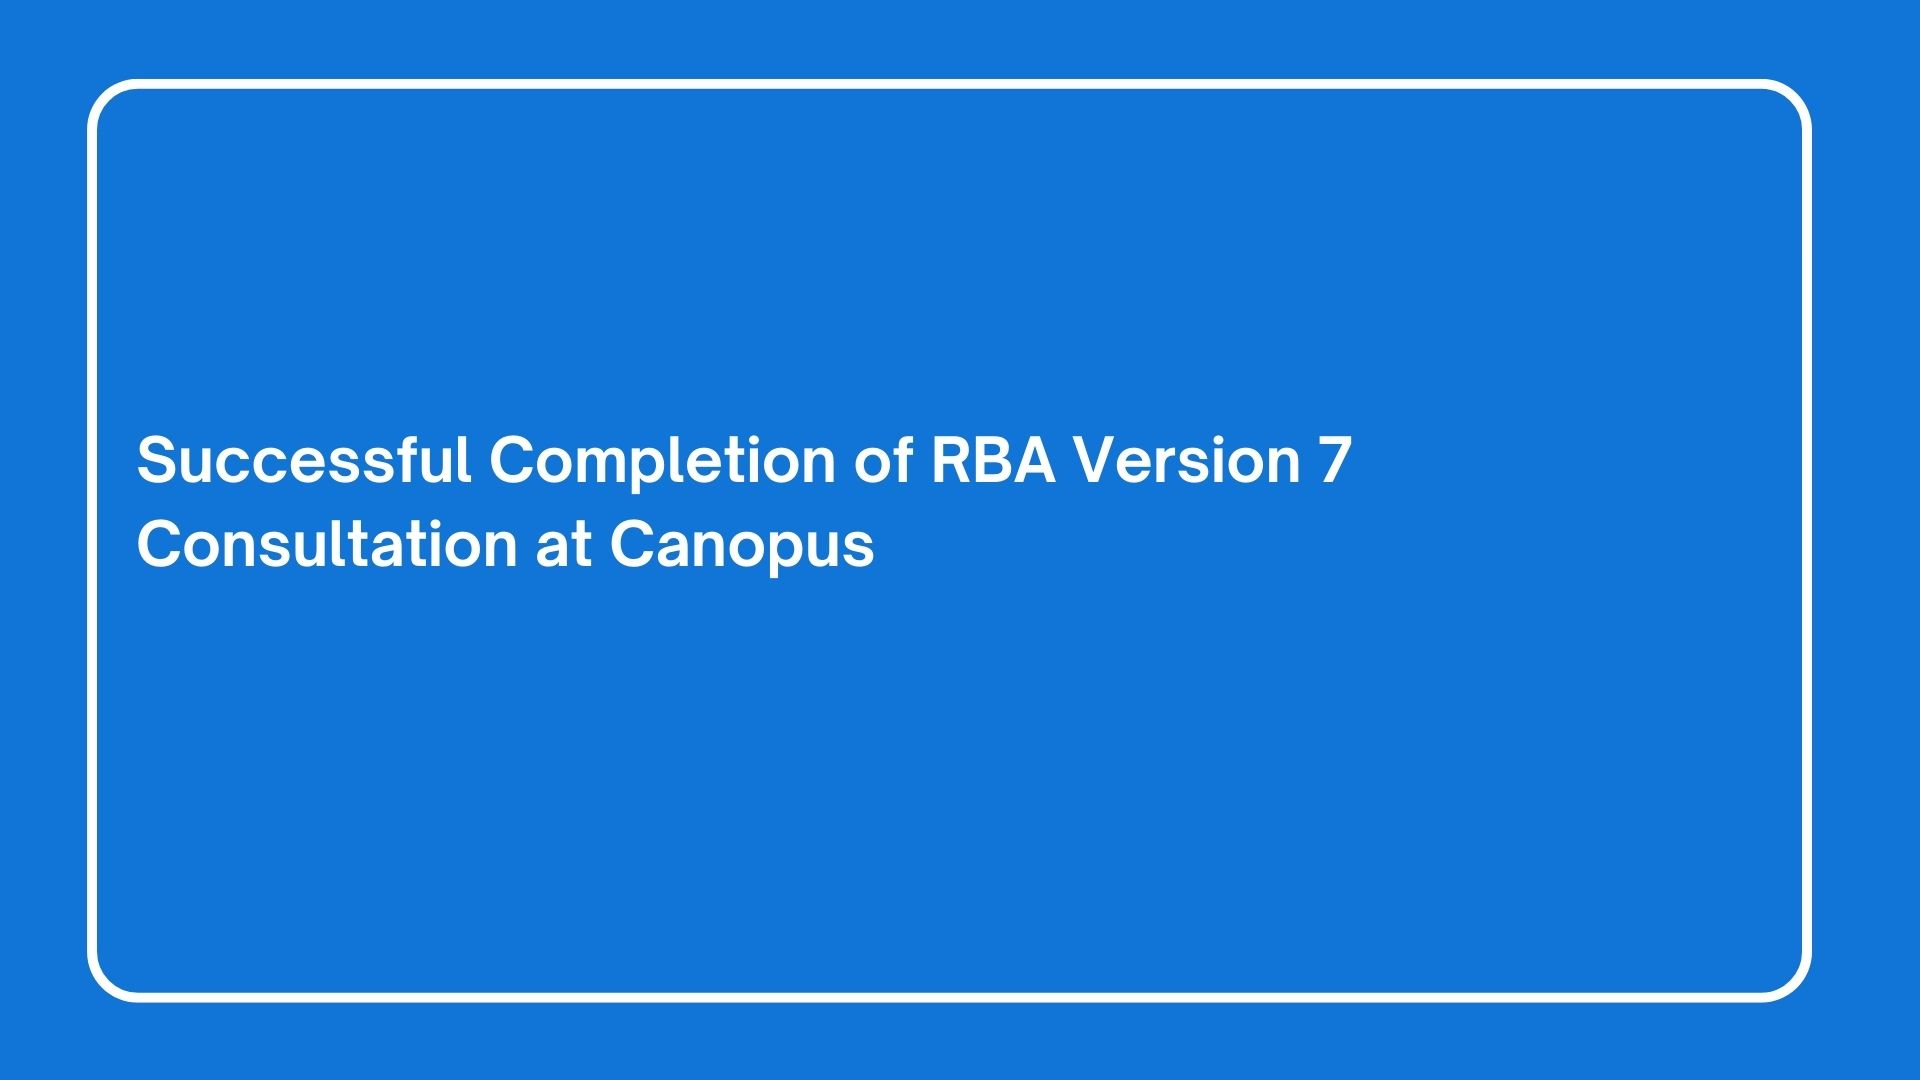 Successful Completion of RBA Version 7 Consultation at Canopus